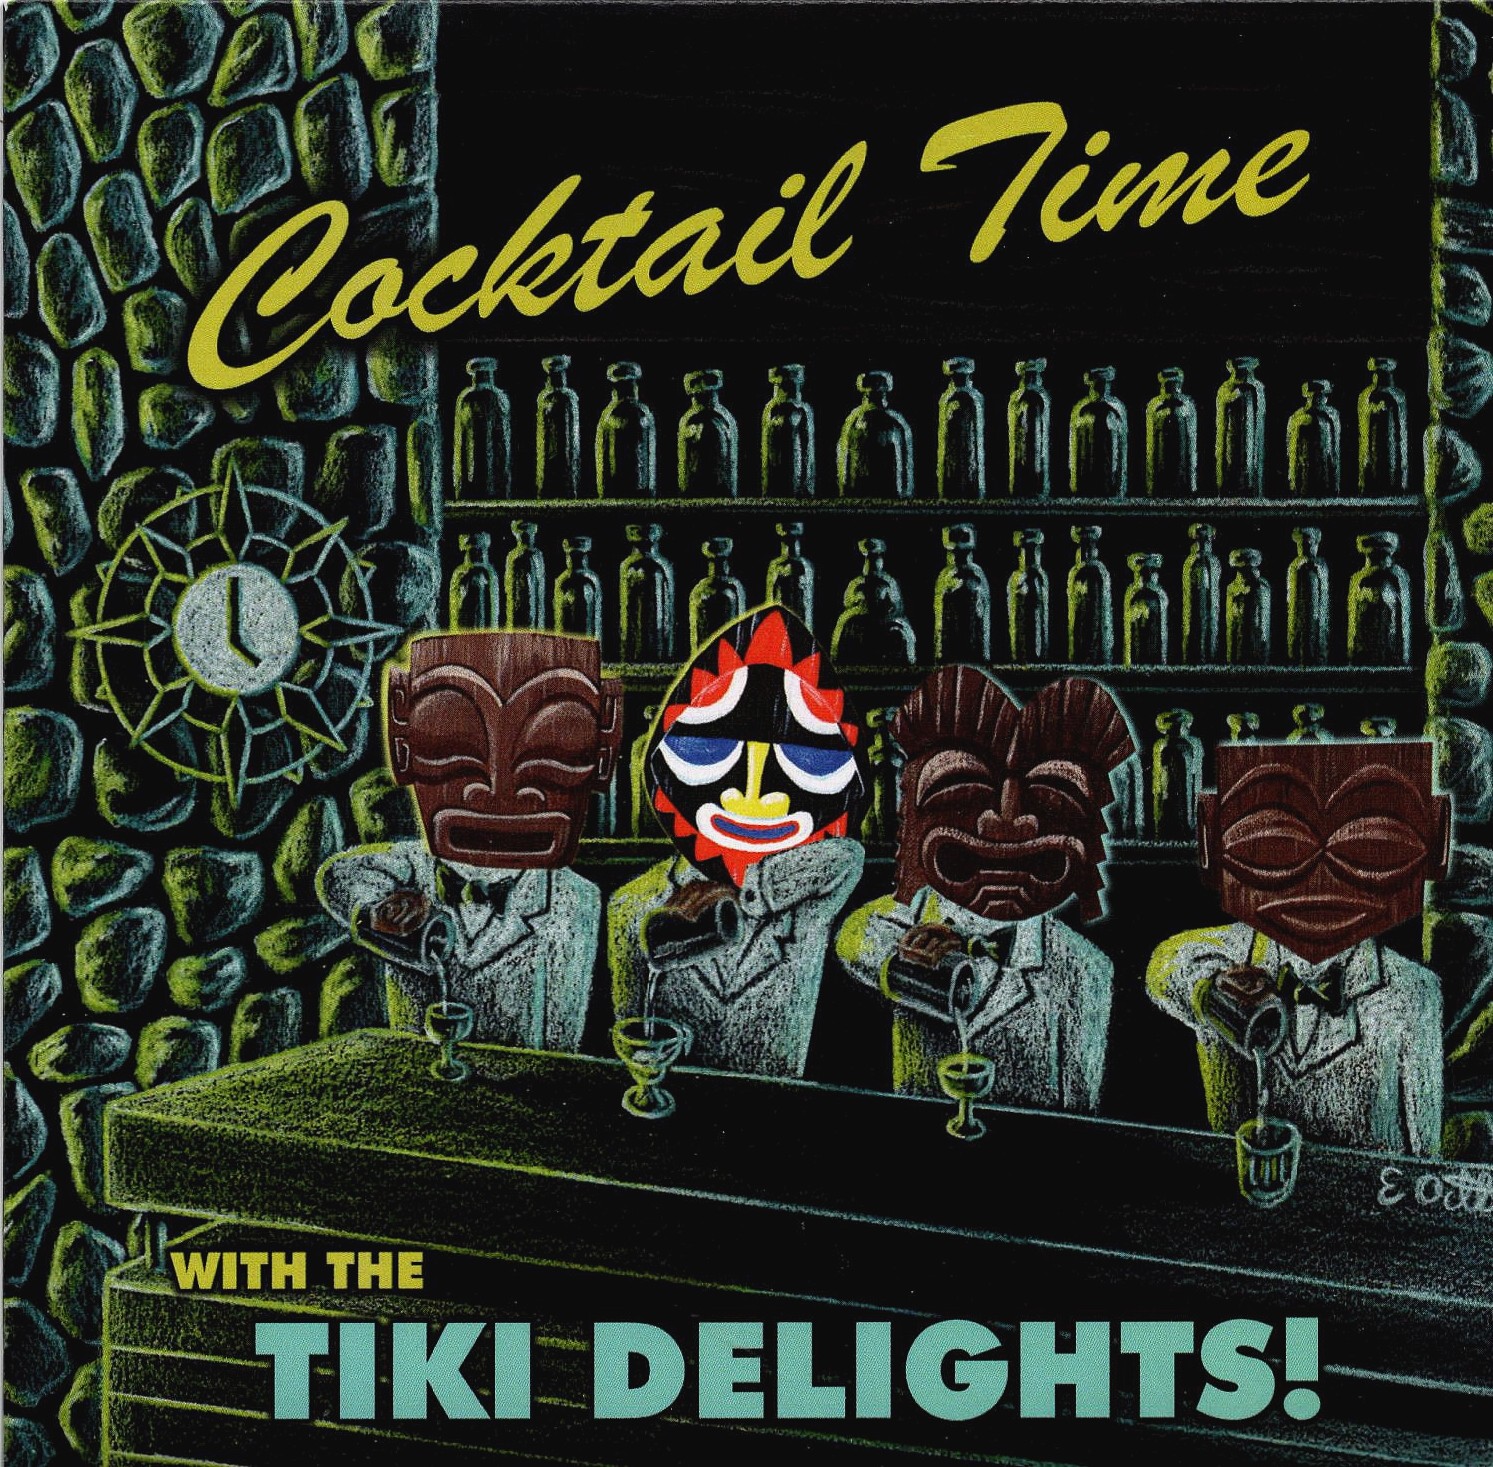 CD- Cocktail Time with the Tiki Delights